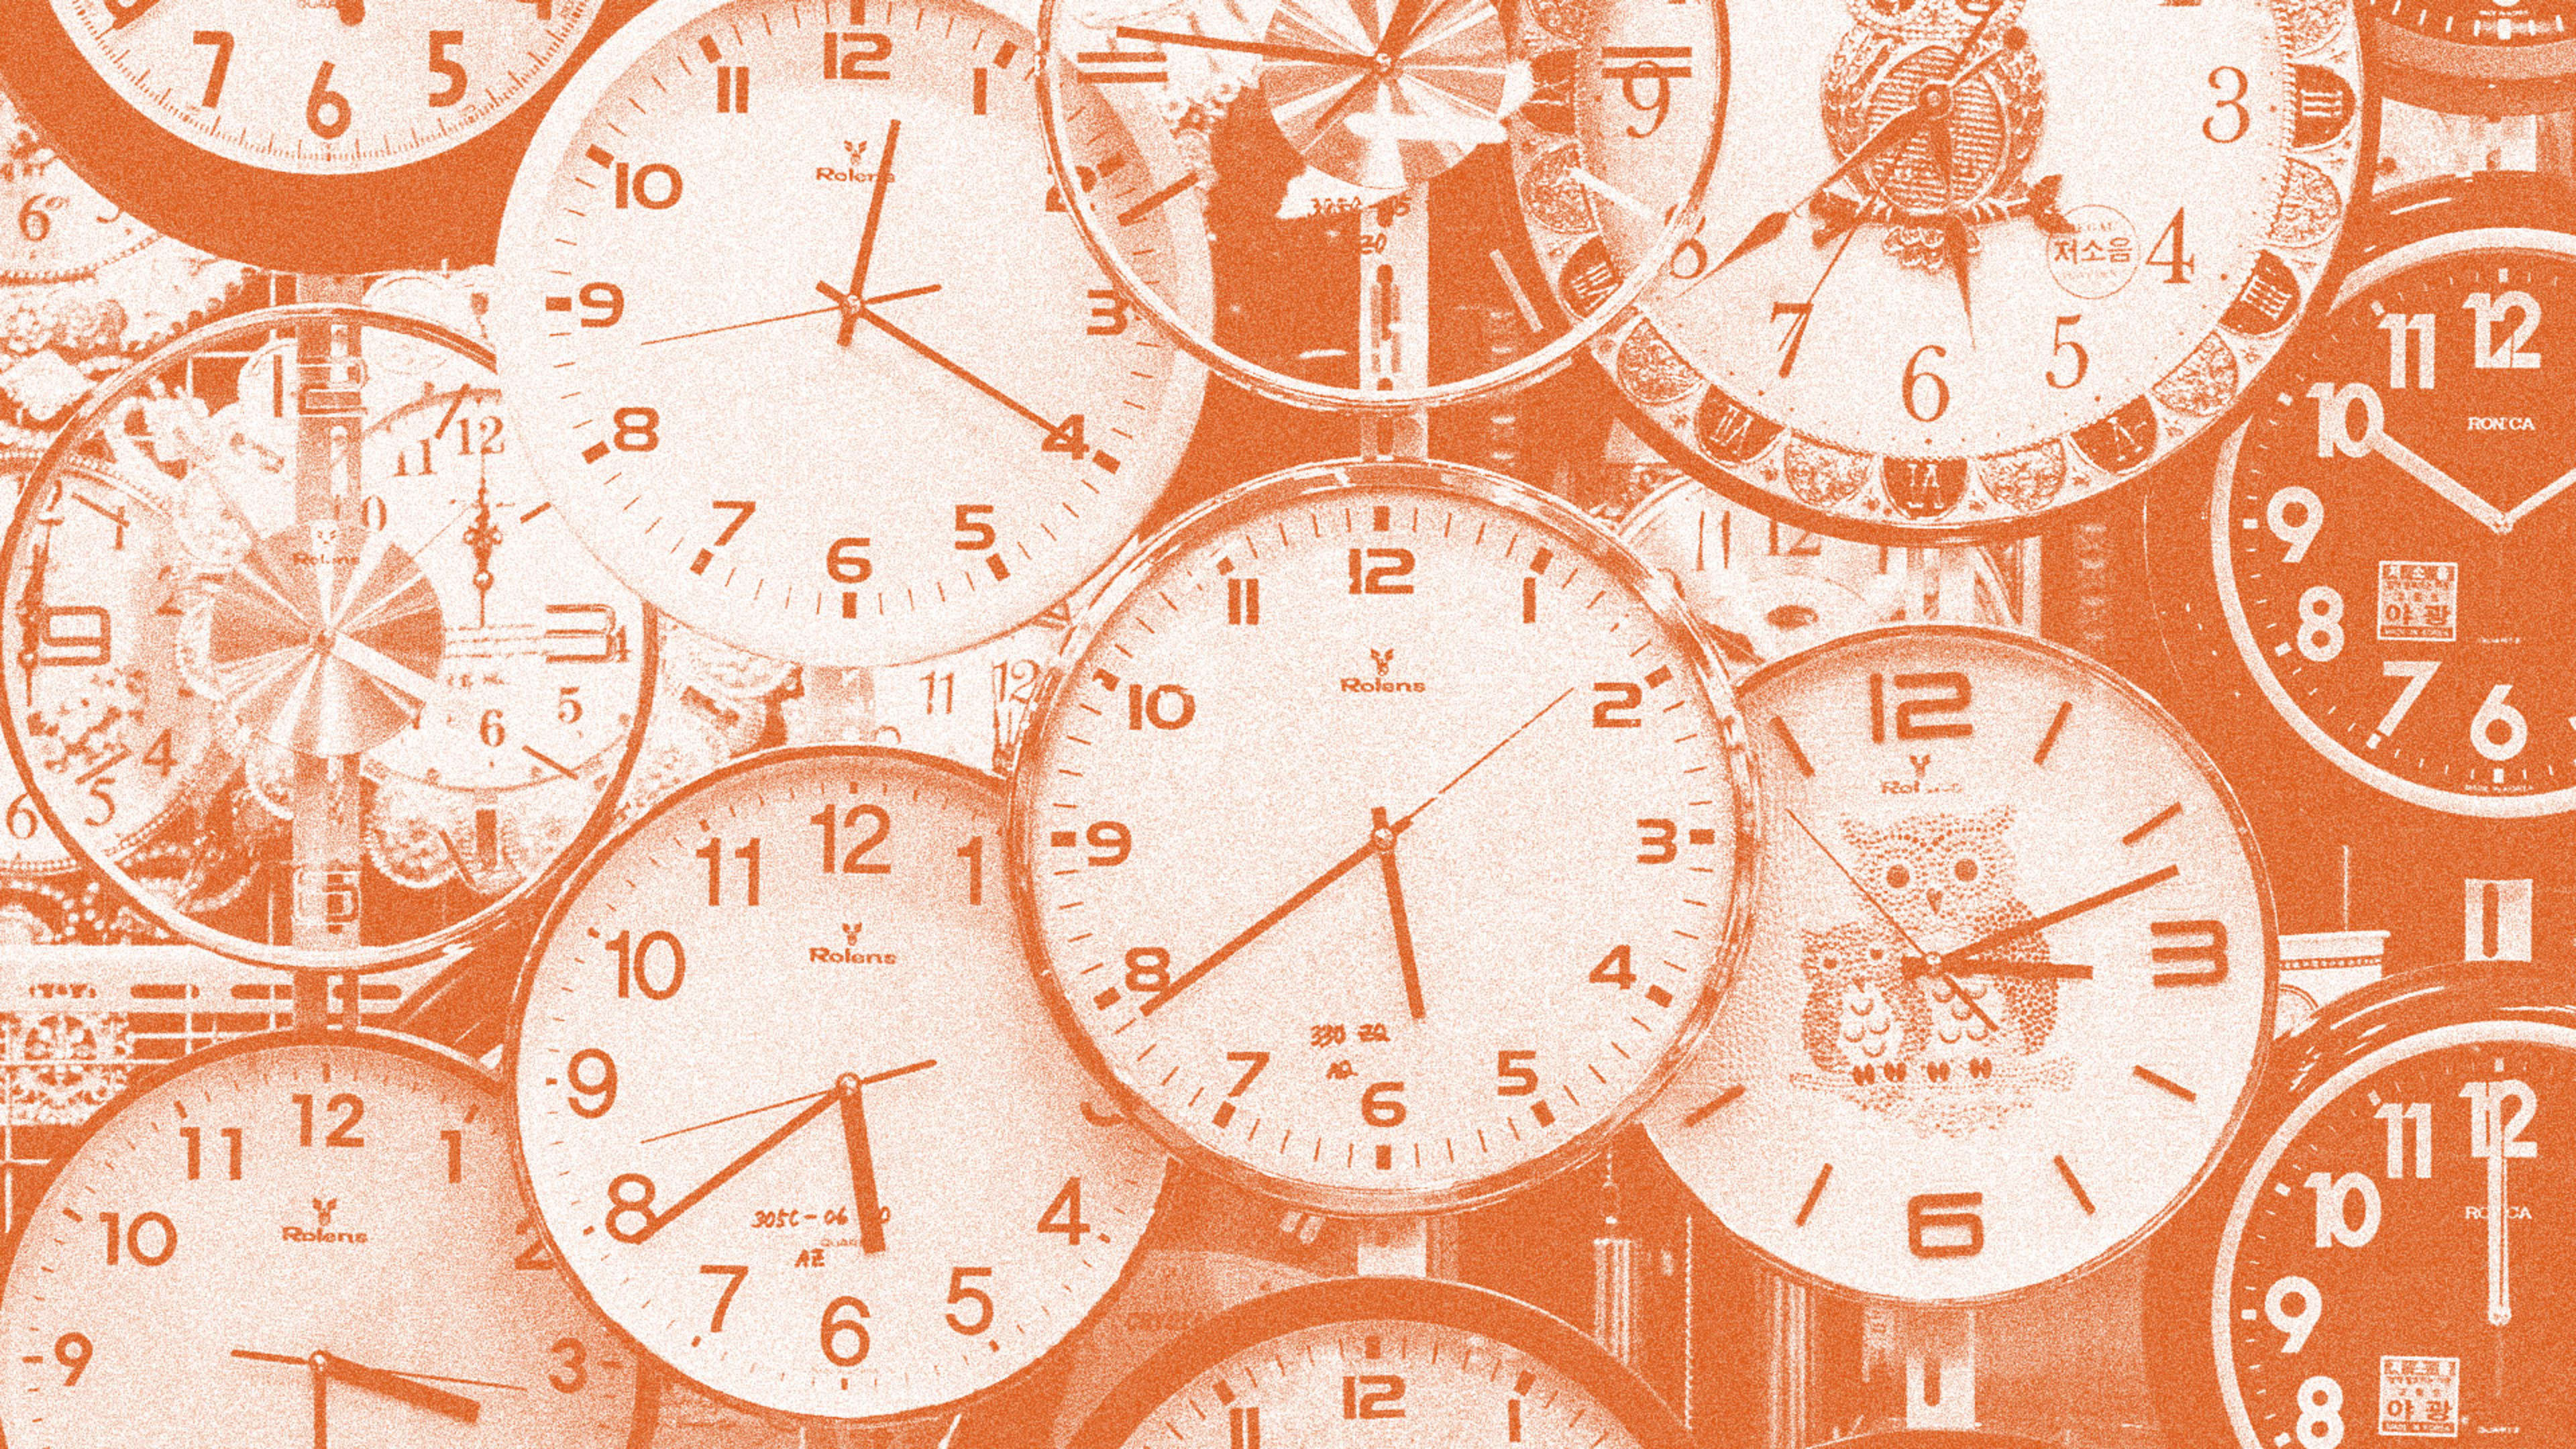 5 lies you’ve been told about time management